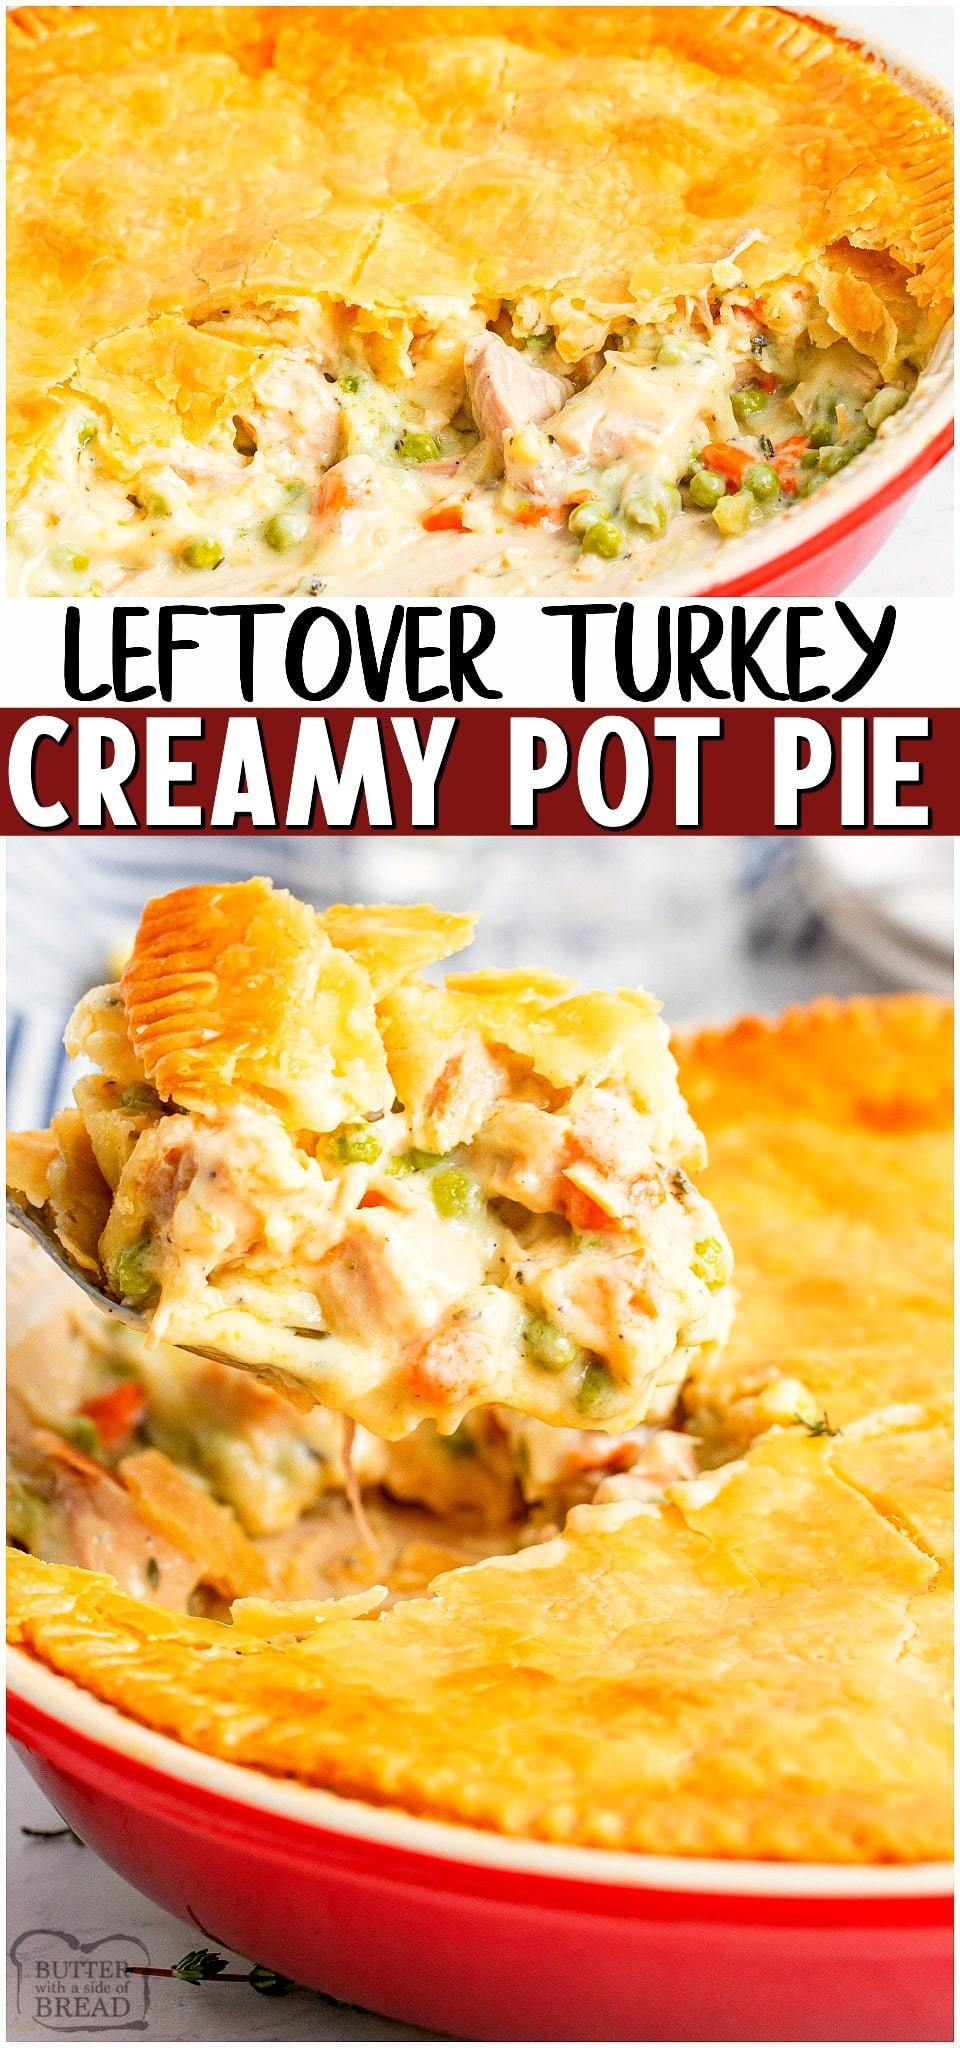 Turkey pot pie made with tender bits of turkey & vegetables in a creamy gravy topped with a crisp golden pie crust. Easy comfort food recipe to make that's perfect for using up leftover turkey!